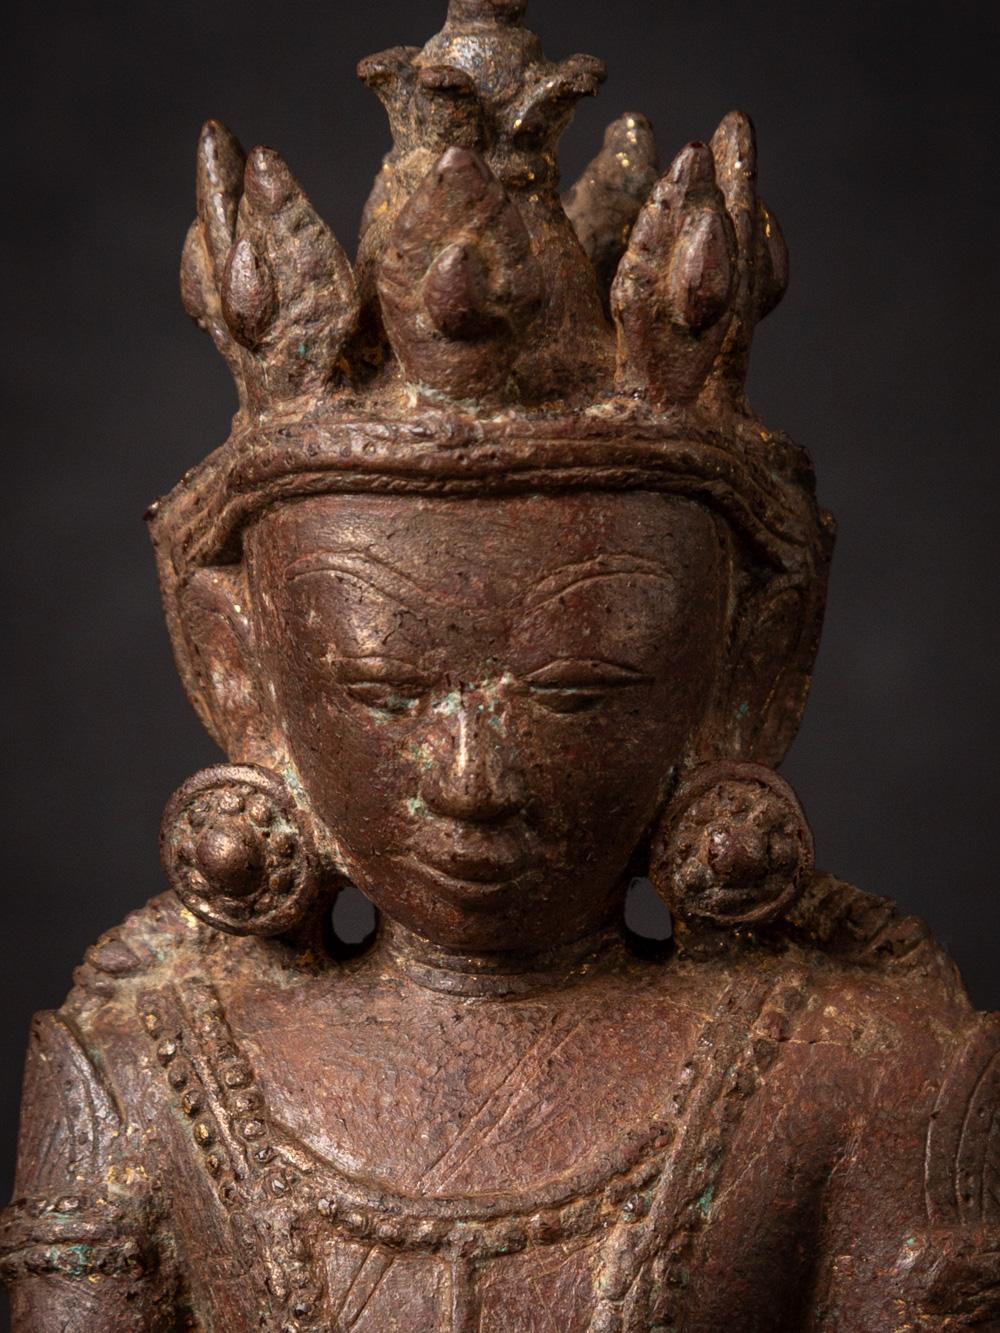 14-15th century Special Antique Bronze Arakan Buddha Statue from Burma For Sale 1